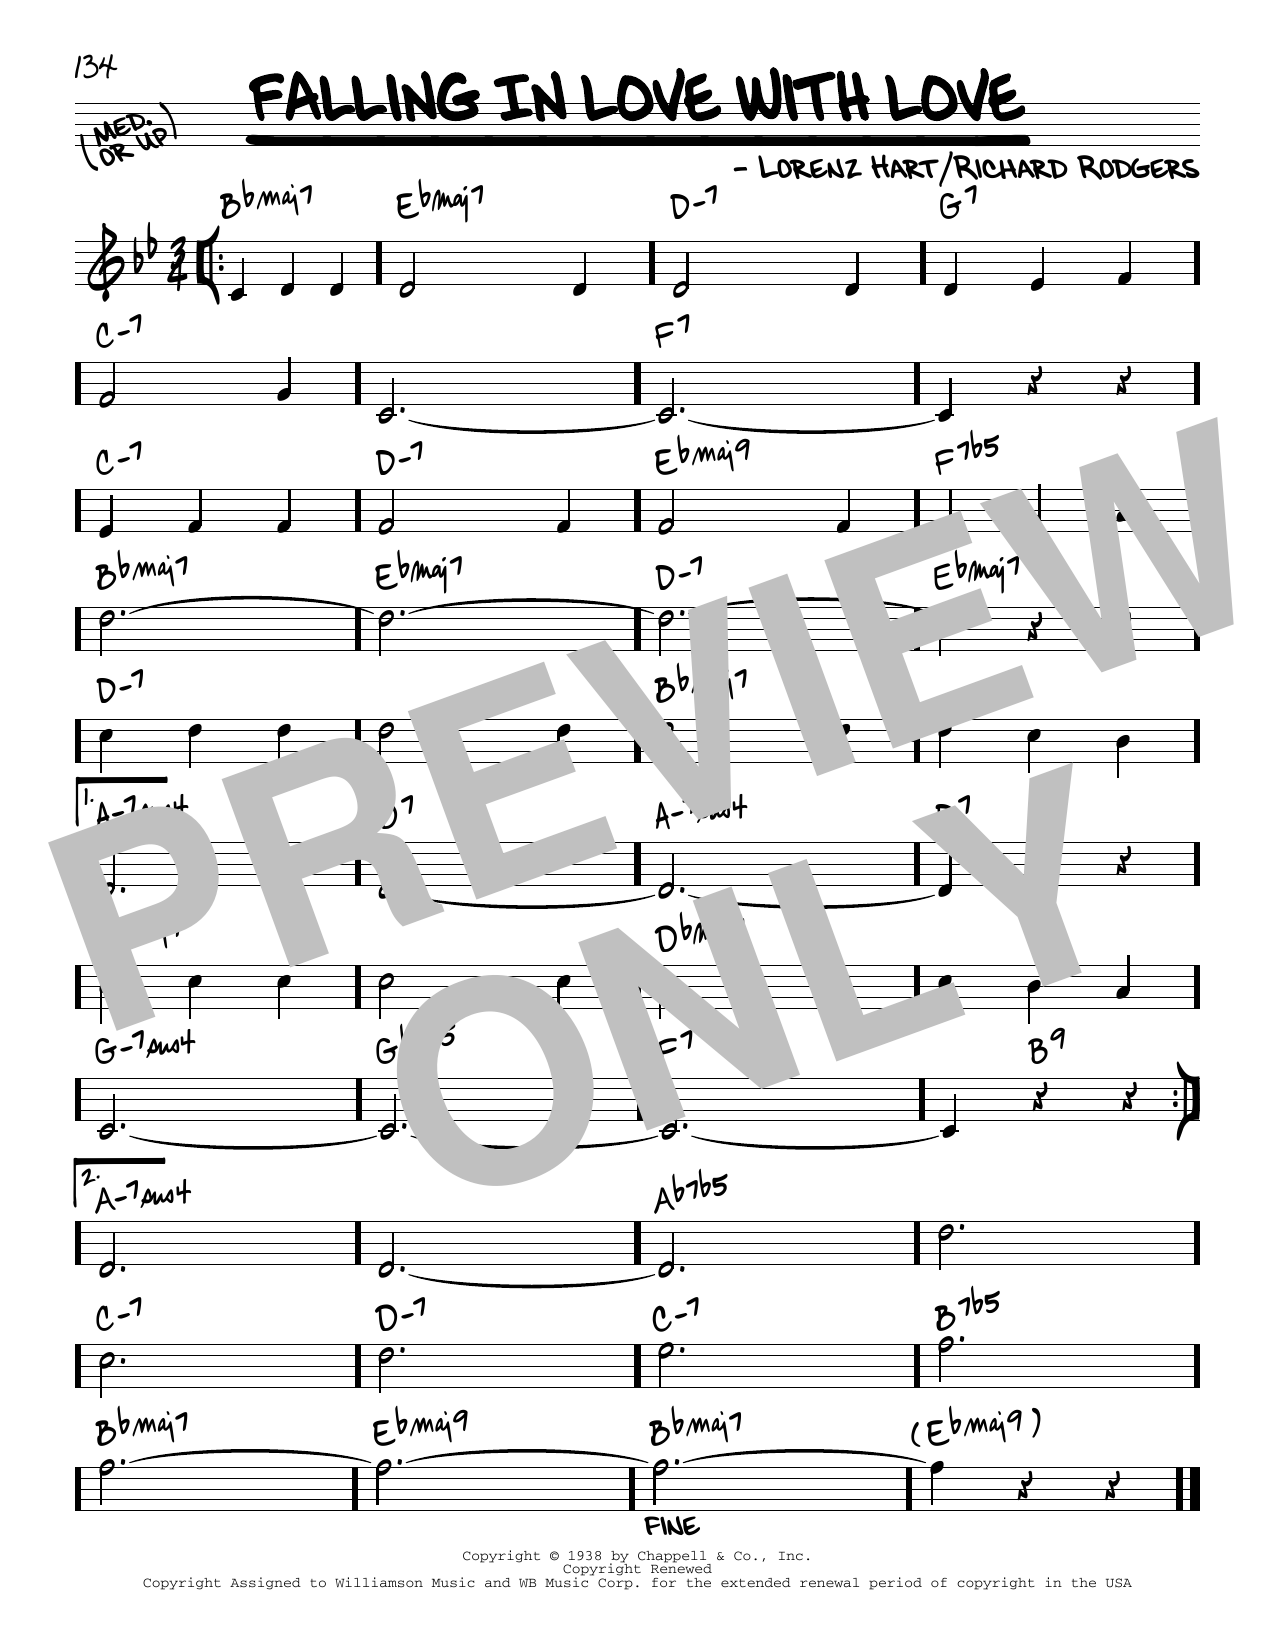 Download Rodgers & Hart Falling In Love With Love [Reharmonized Sheet Music